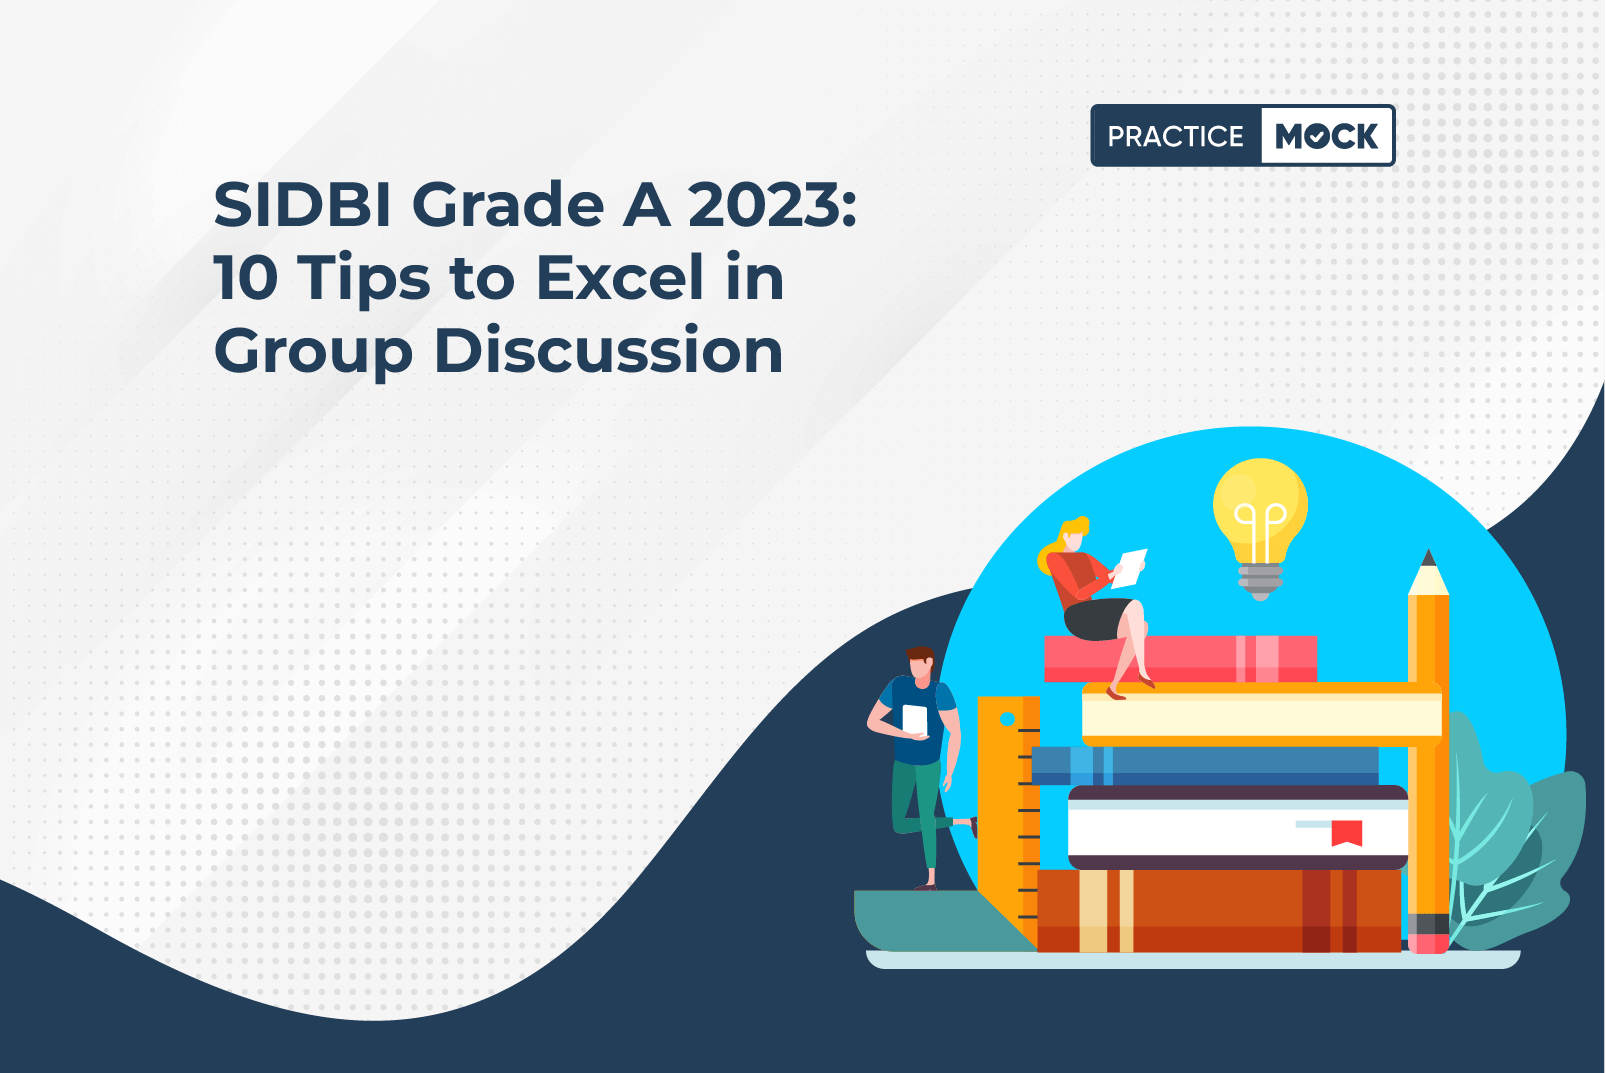 SIDBI Grade A 2023 10 Tips to Excel in Group Discussion